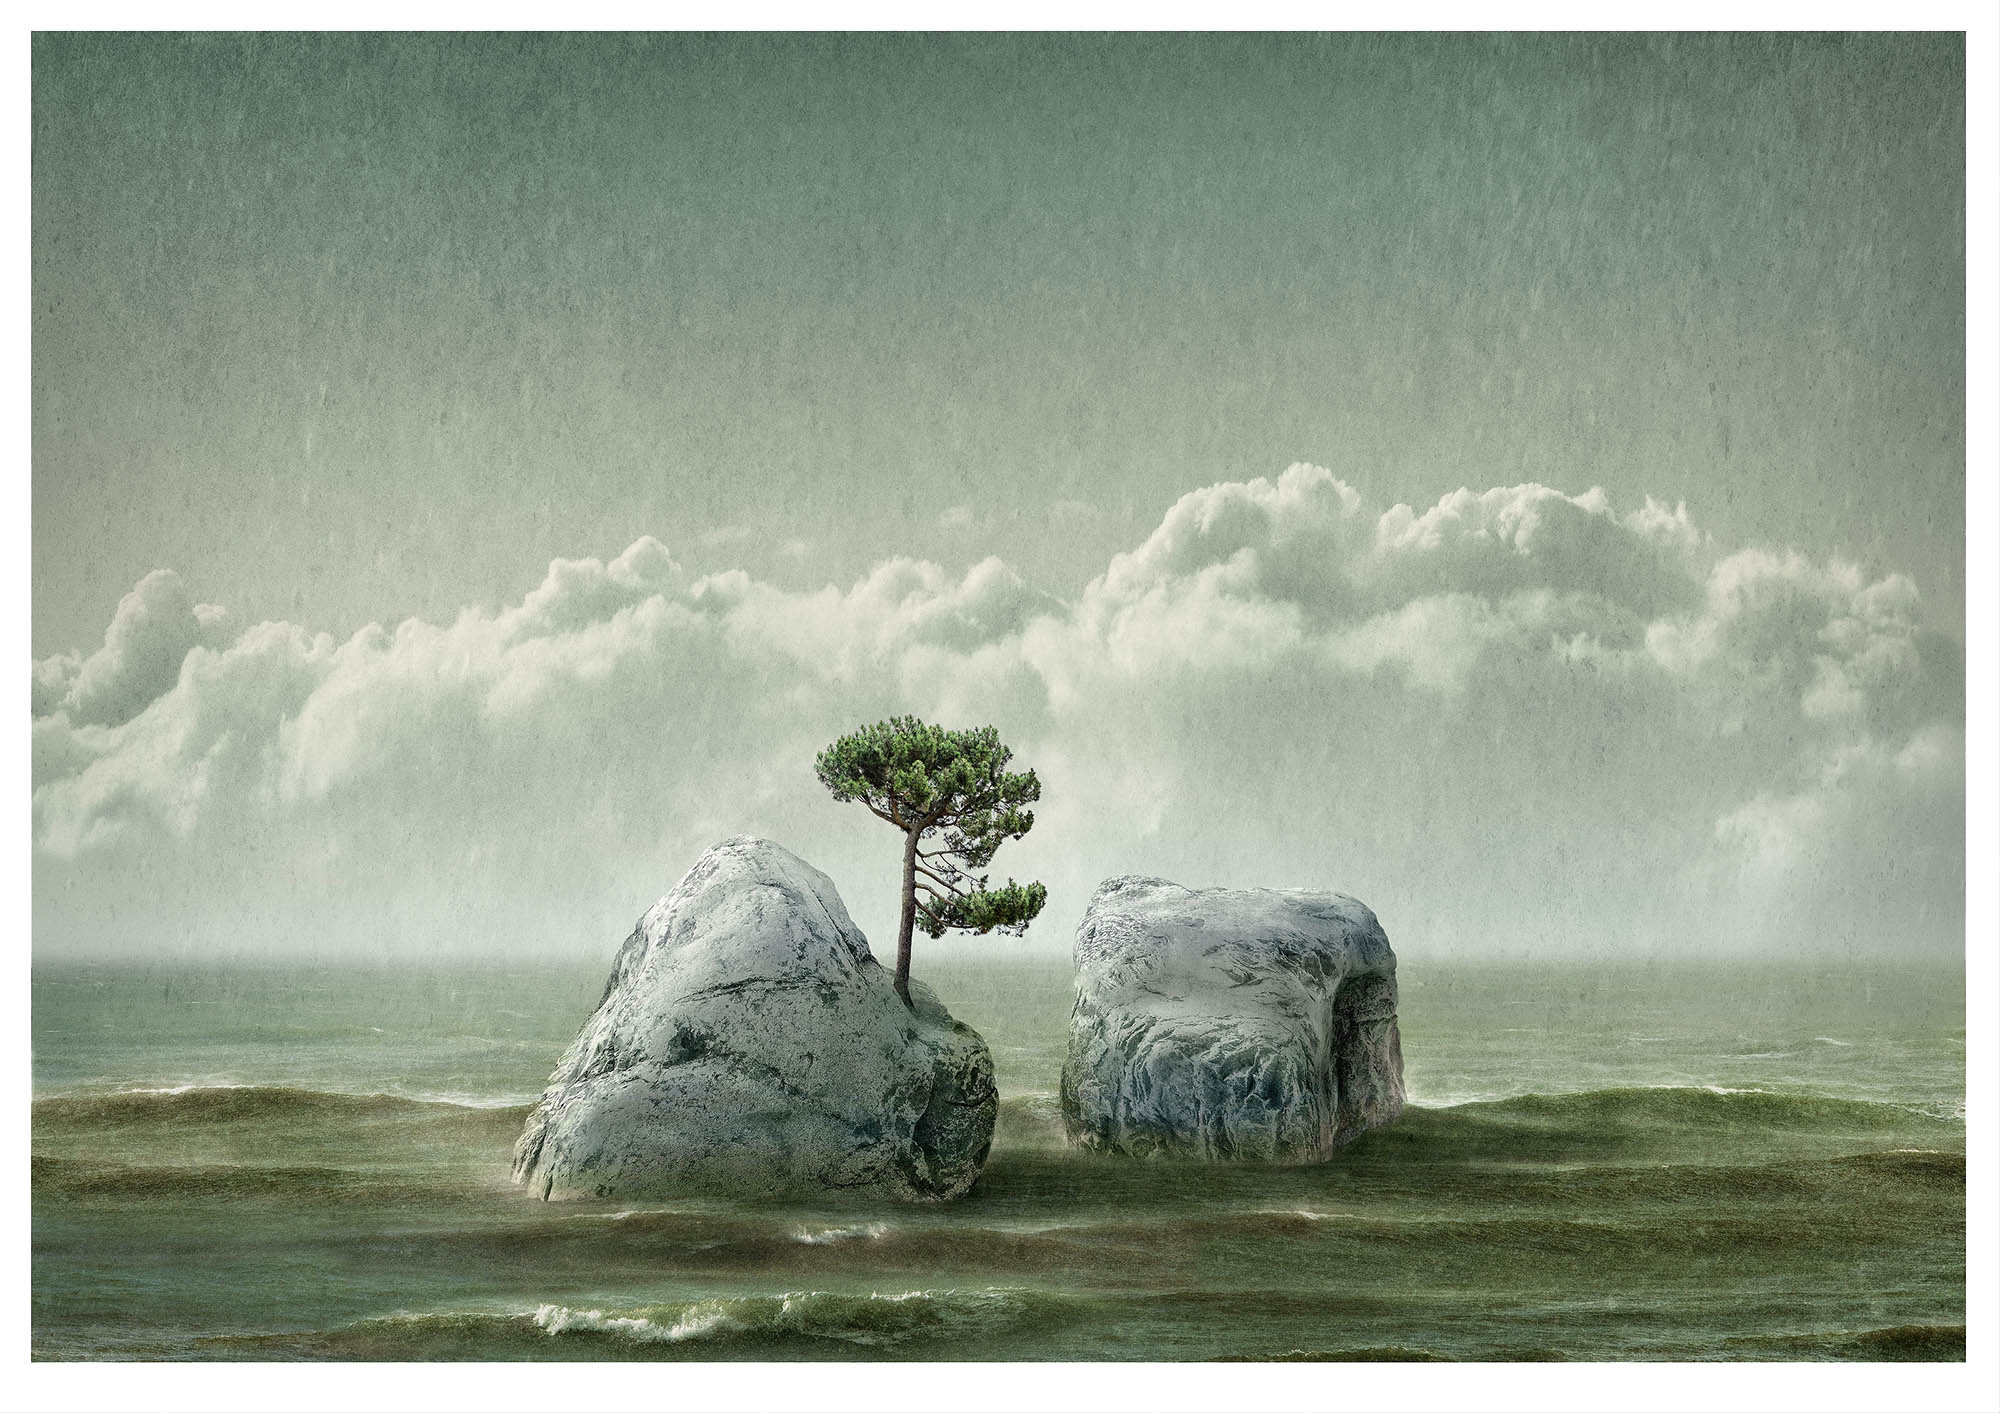 Illustrative fantasy, composite photograph with two small islands with one pine tree in middle of a sea